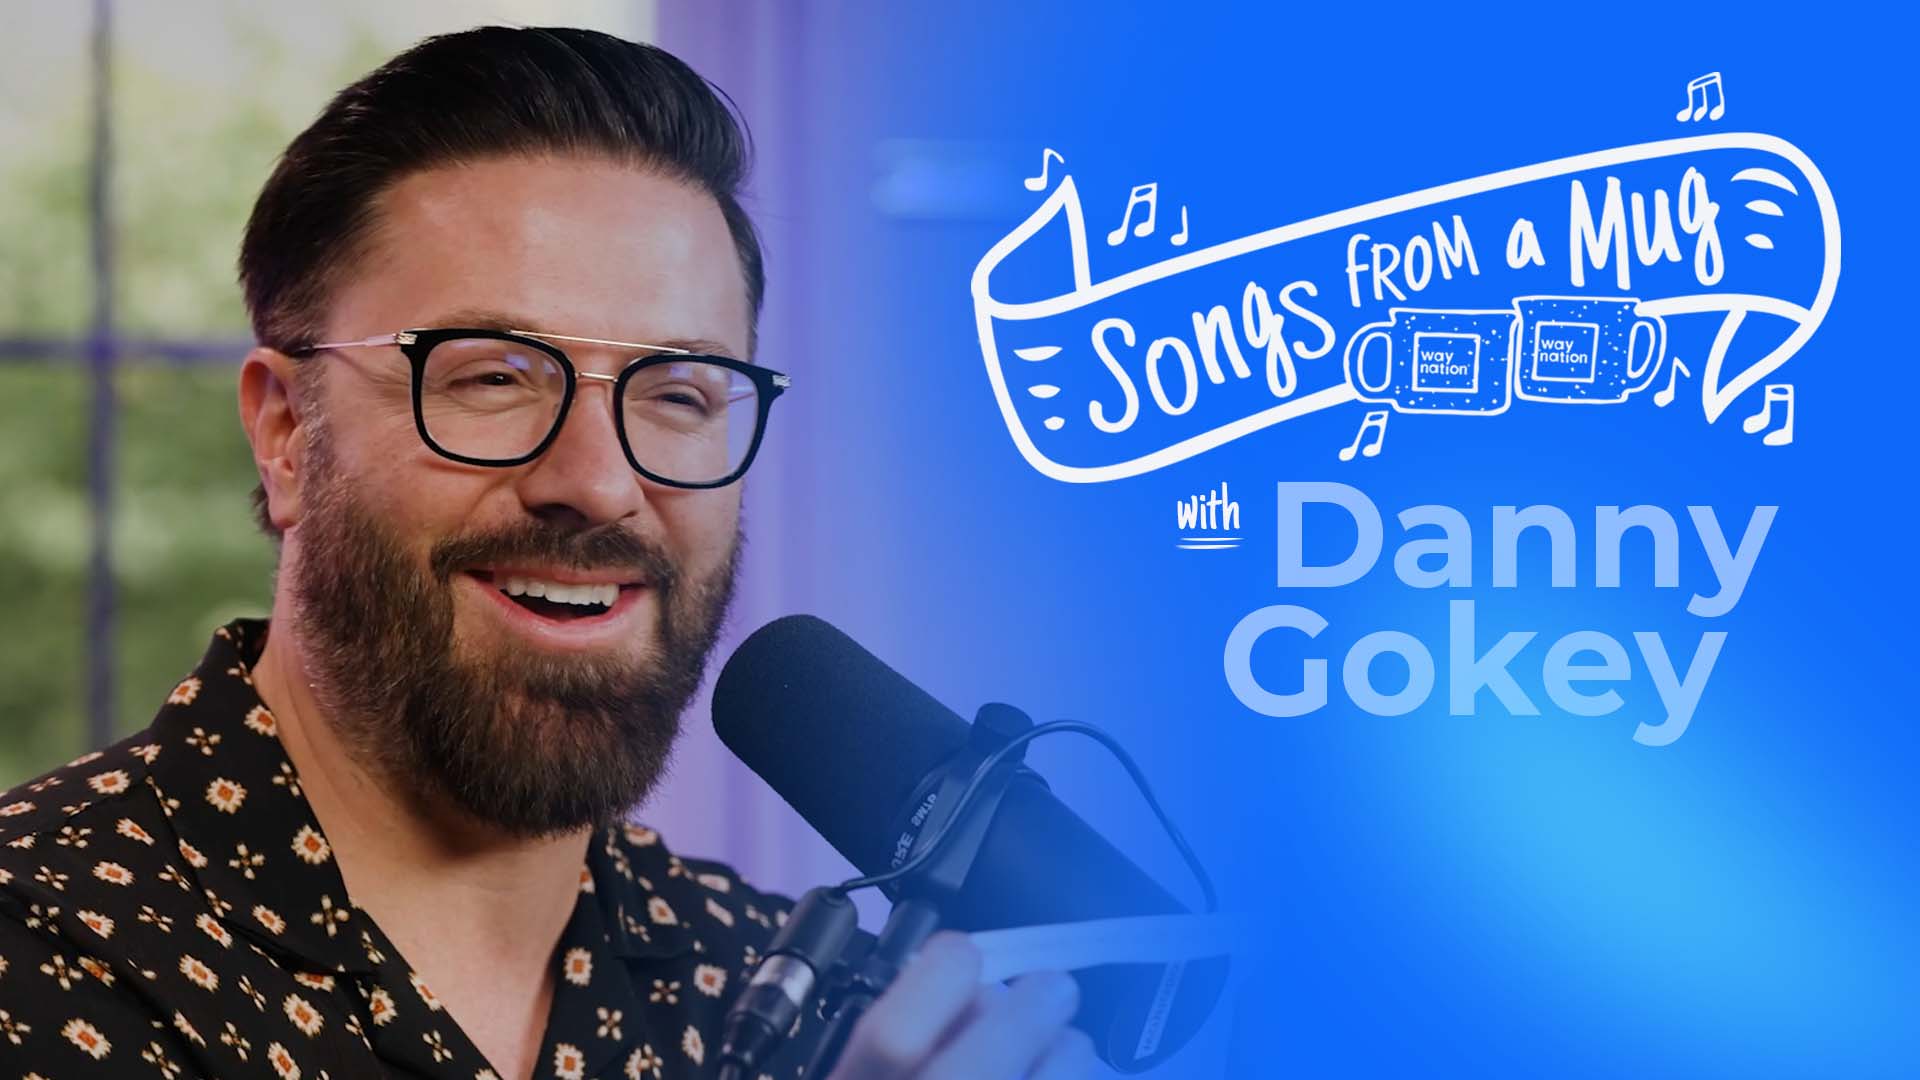 Only Danny Gokey Could Take Us to Church With SpongeBob & Michael Jackson Covers | Songs From a Mug